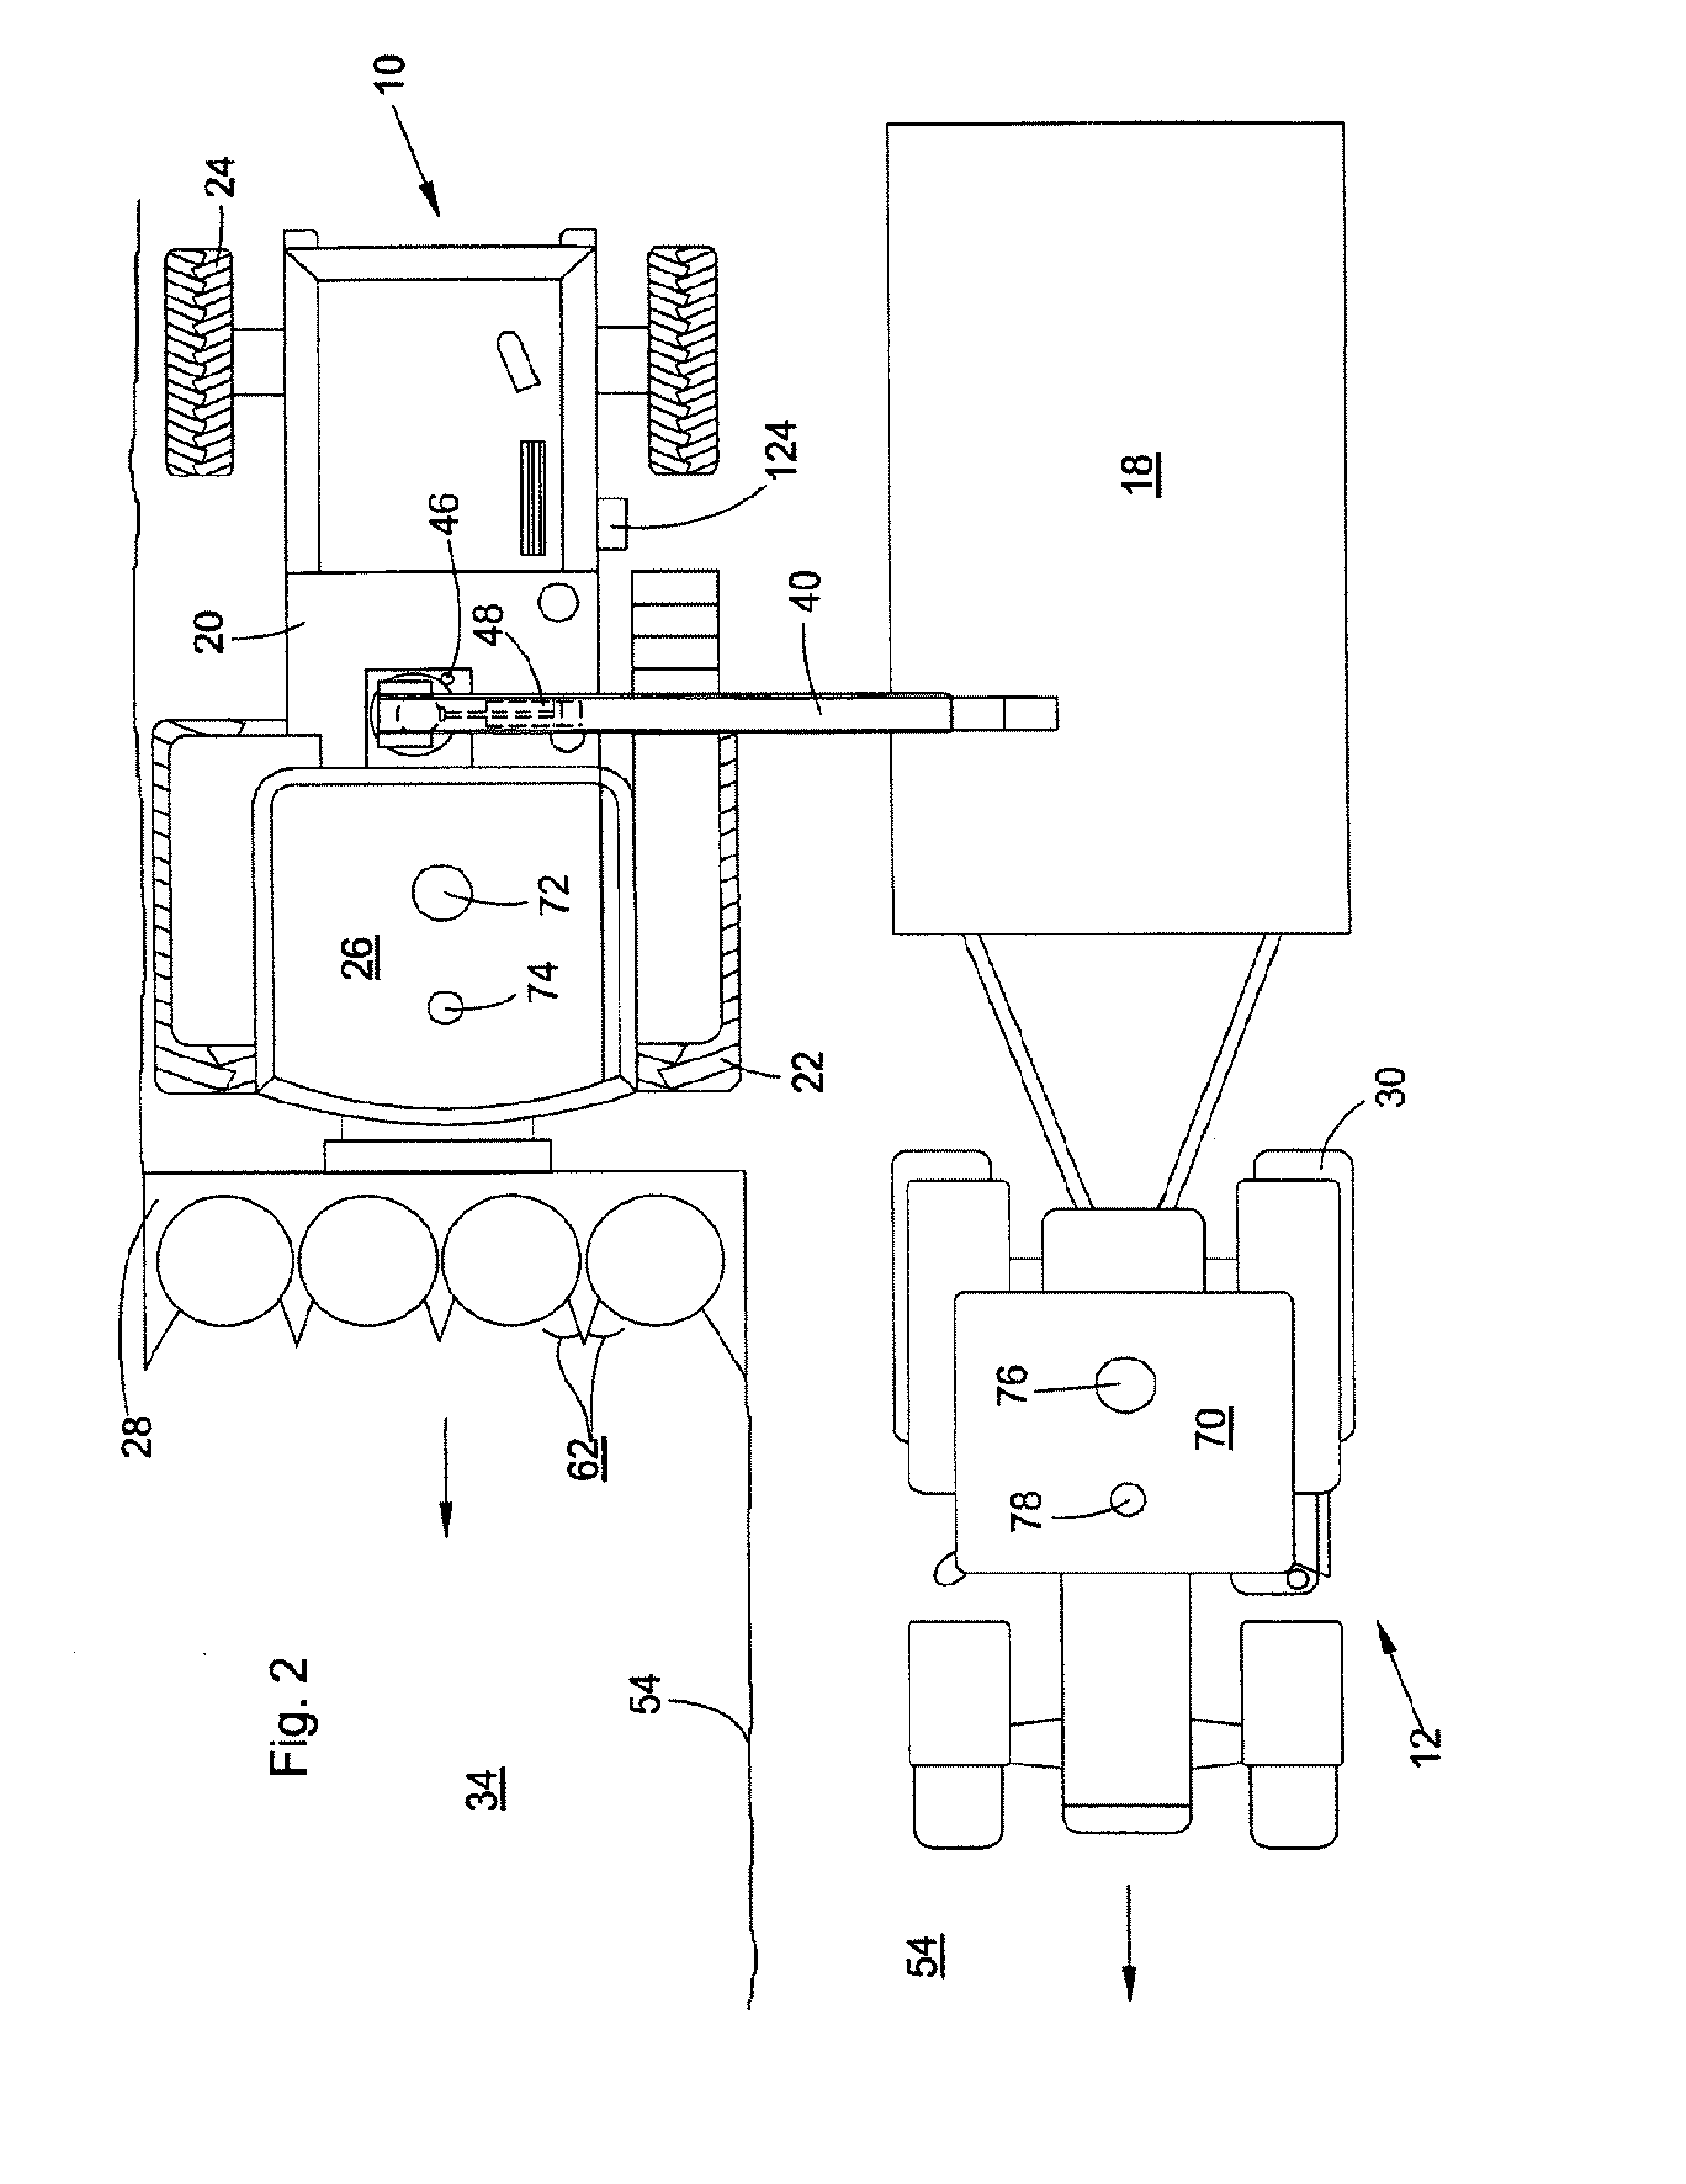 Control arrangement for controlling the transfer of agricultural crop from a harvesting machine to a transport vehicle